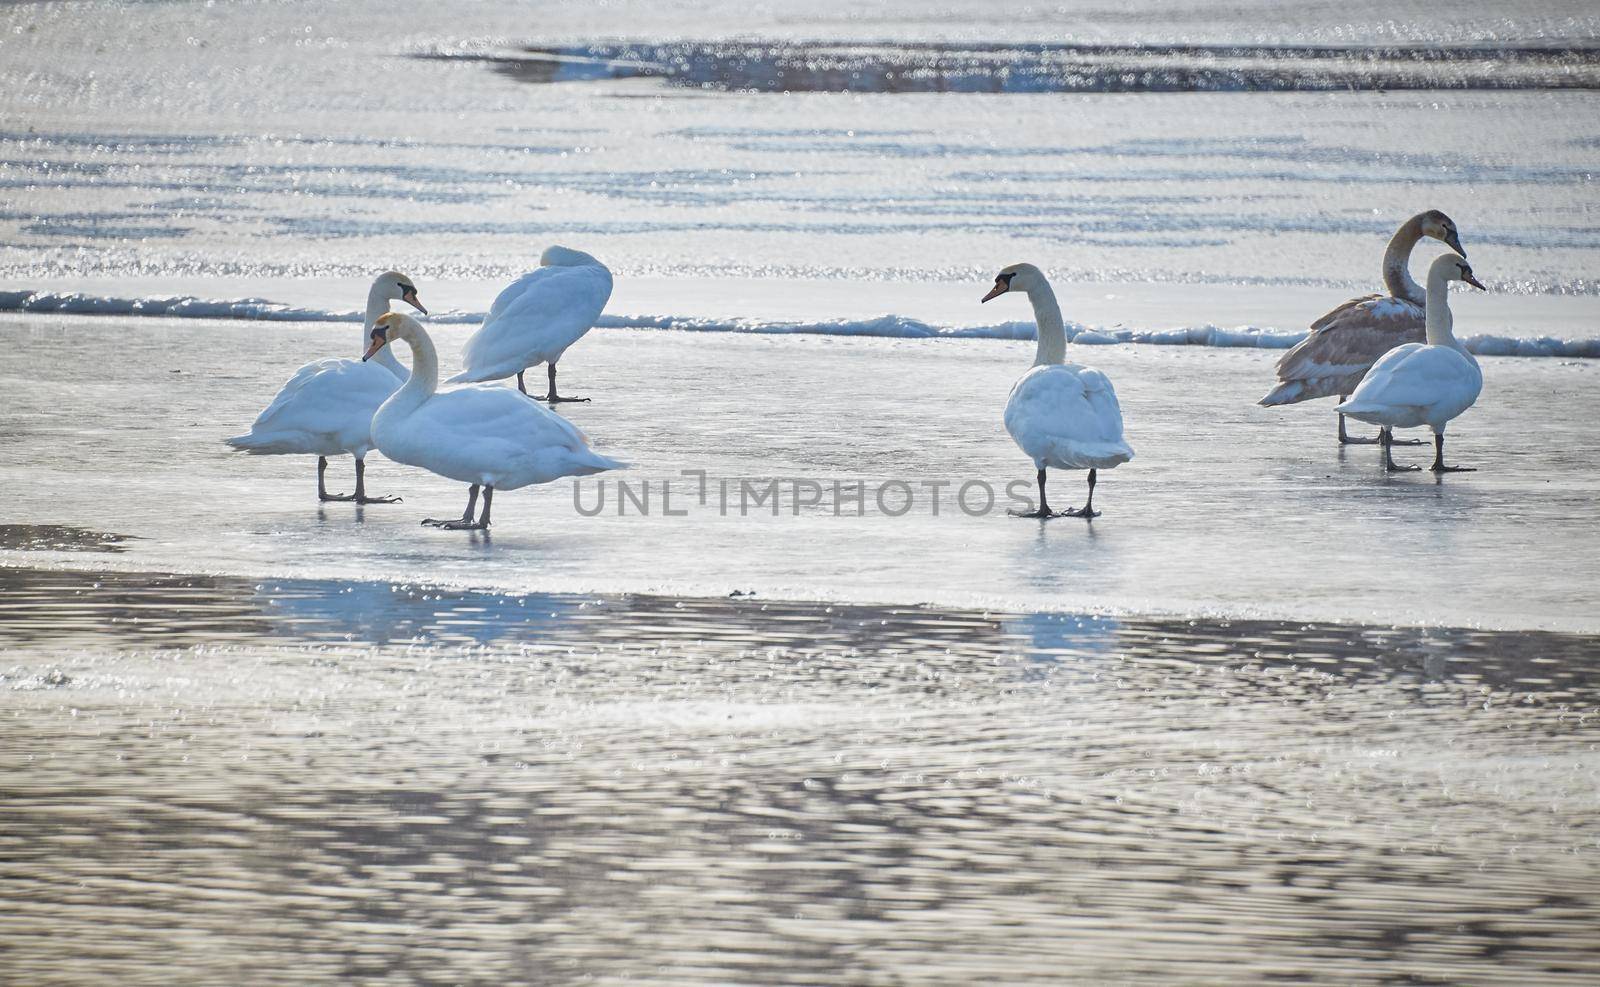 Group of white swans standing on the ice against water surface in winter.Beautiful mute swan pair standing and preening on icy pond.